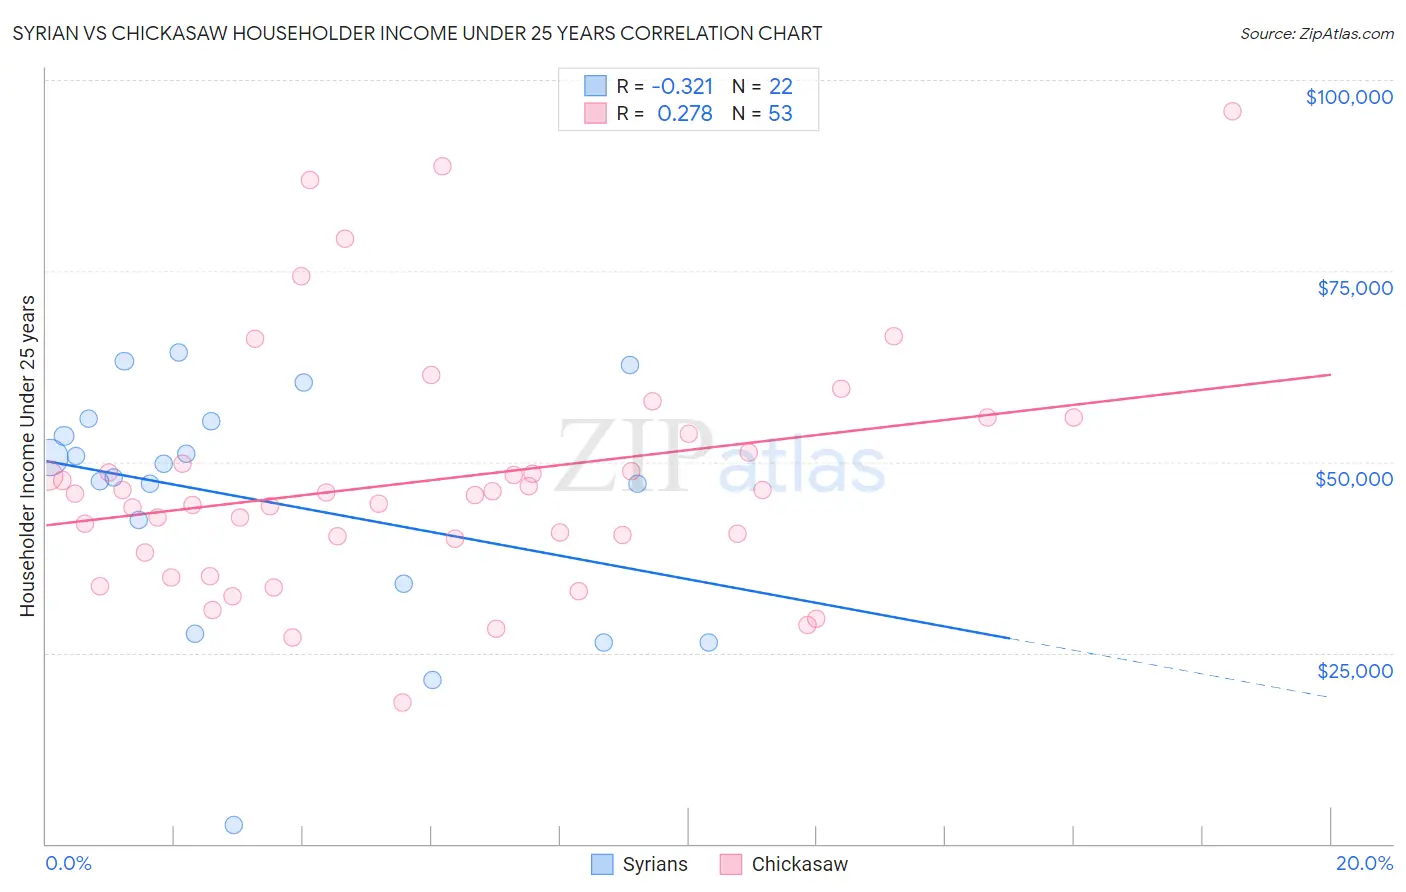 Syrian vs Chickasaw Householder Income Under 25 years